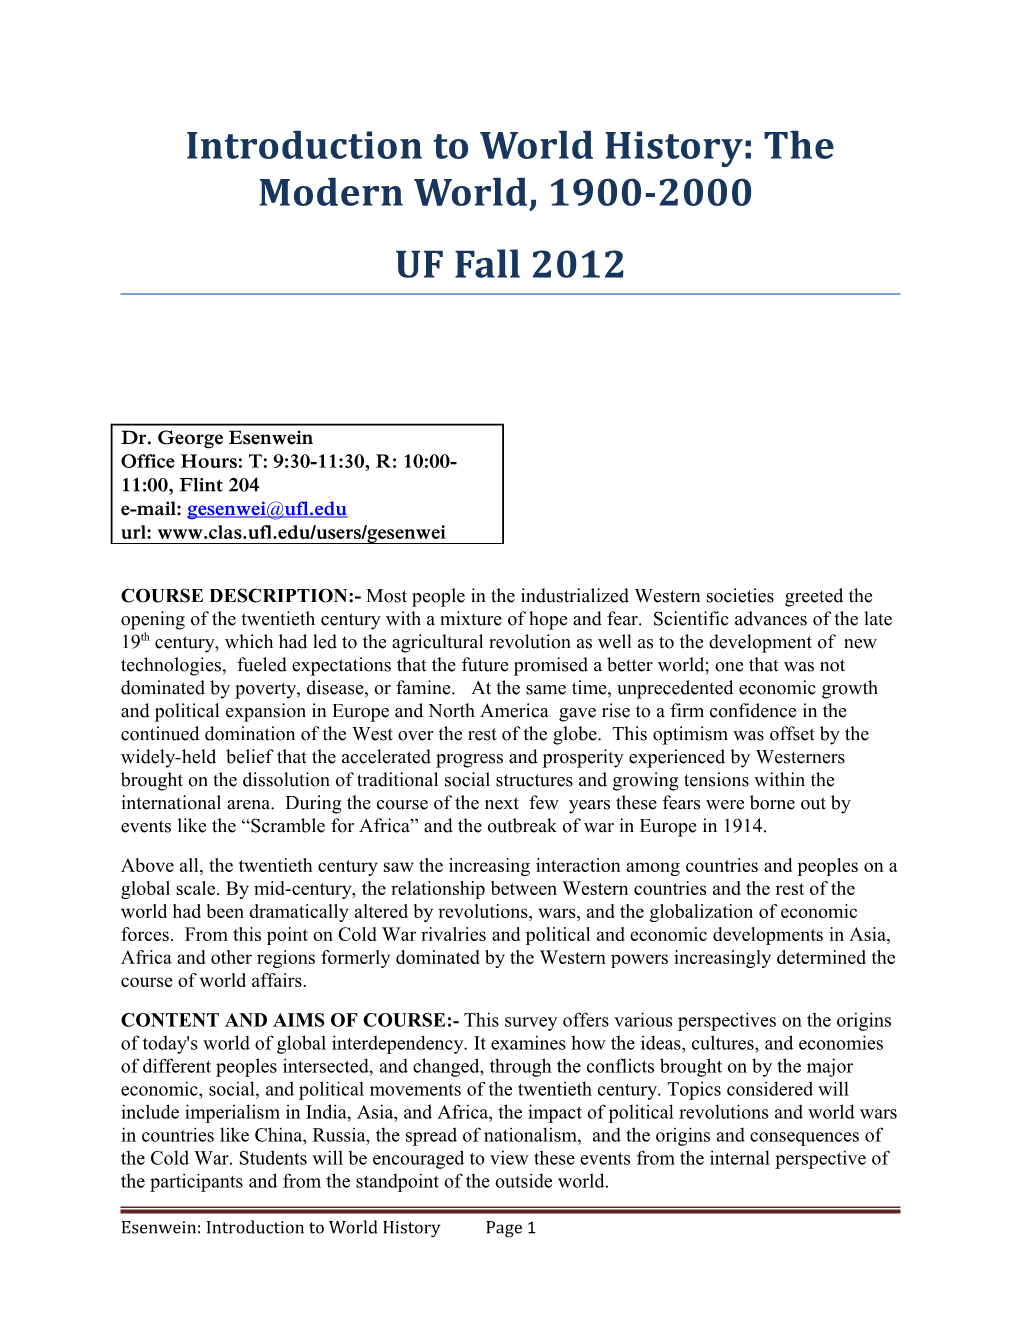 Introduction to World History: the Modern World, 1900-2000